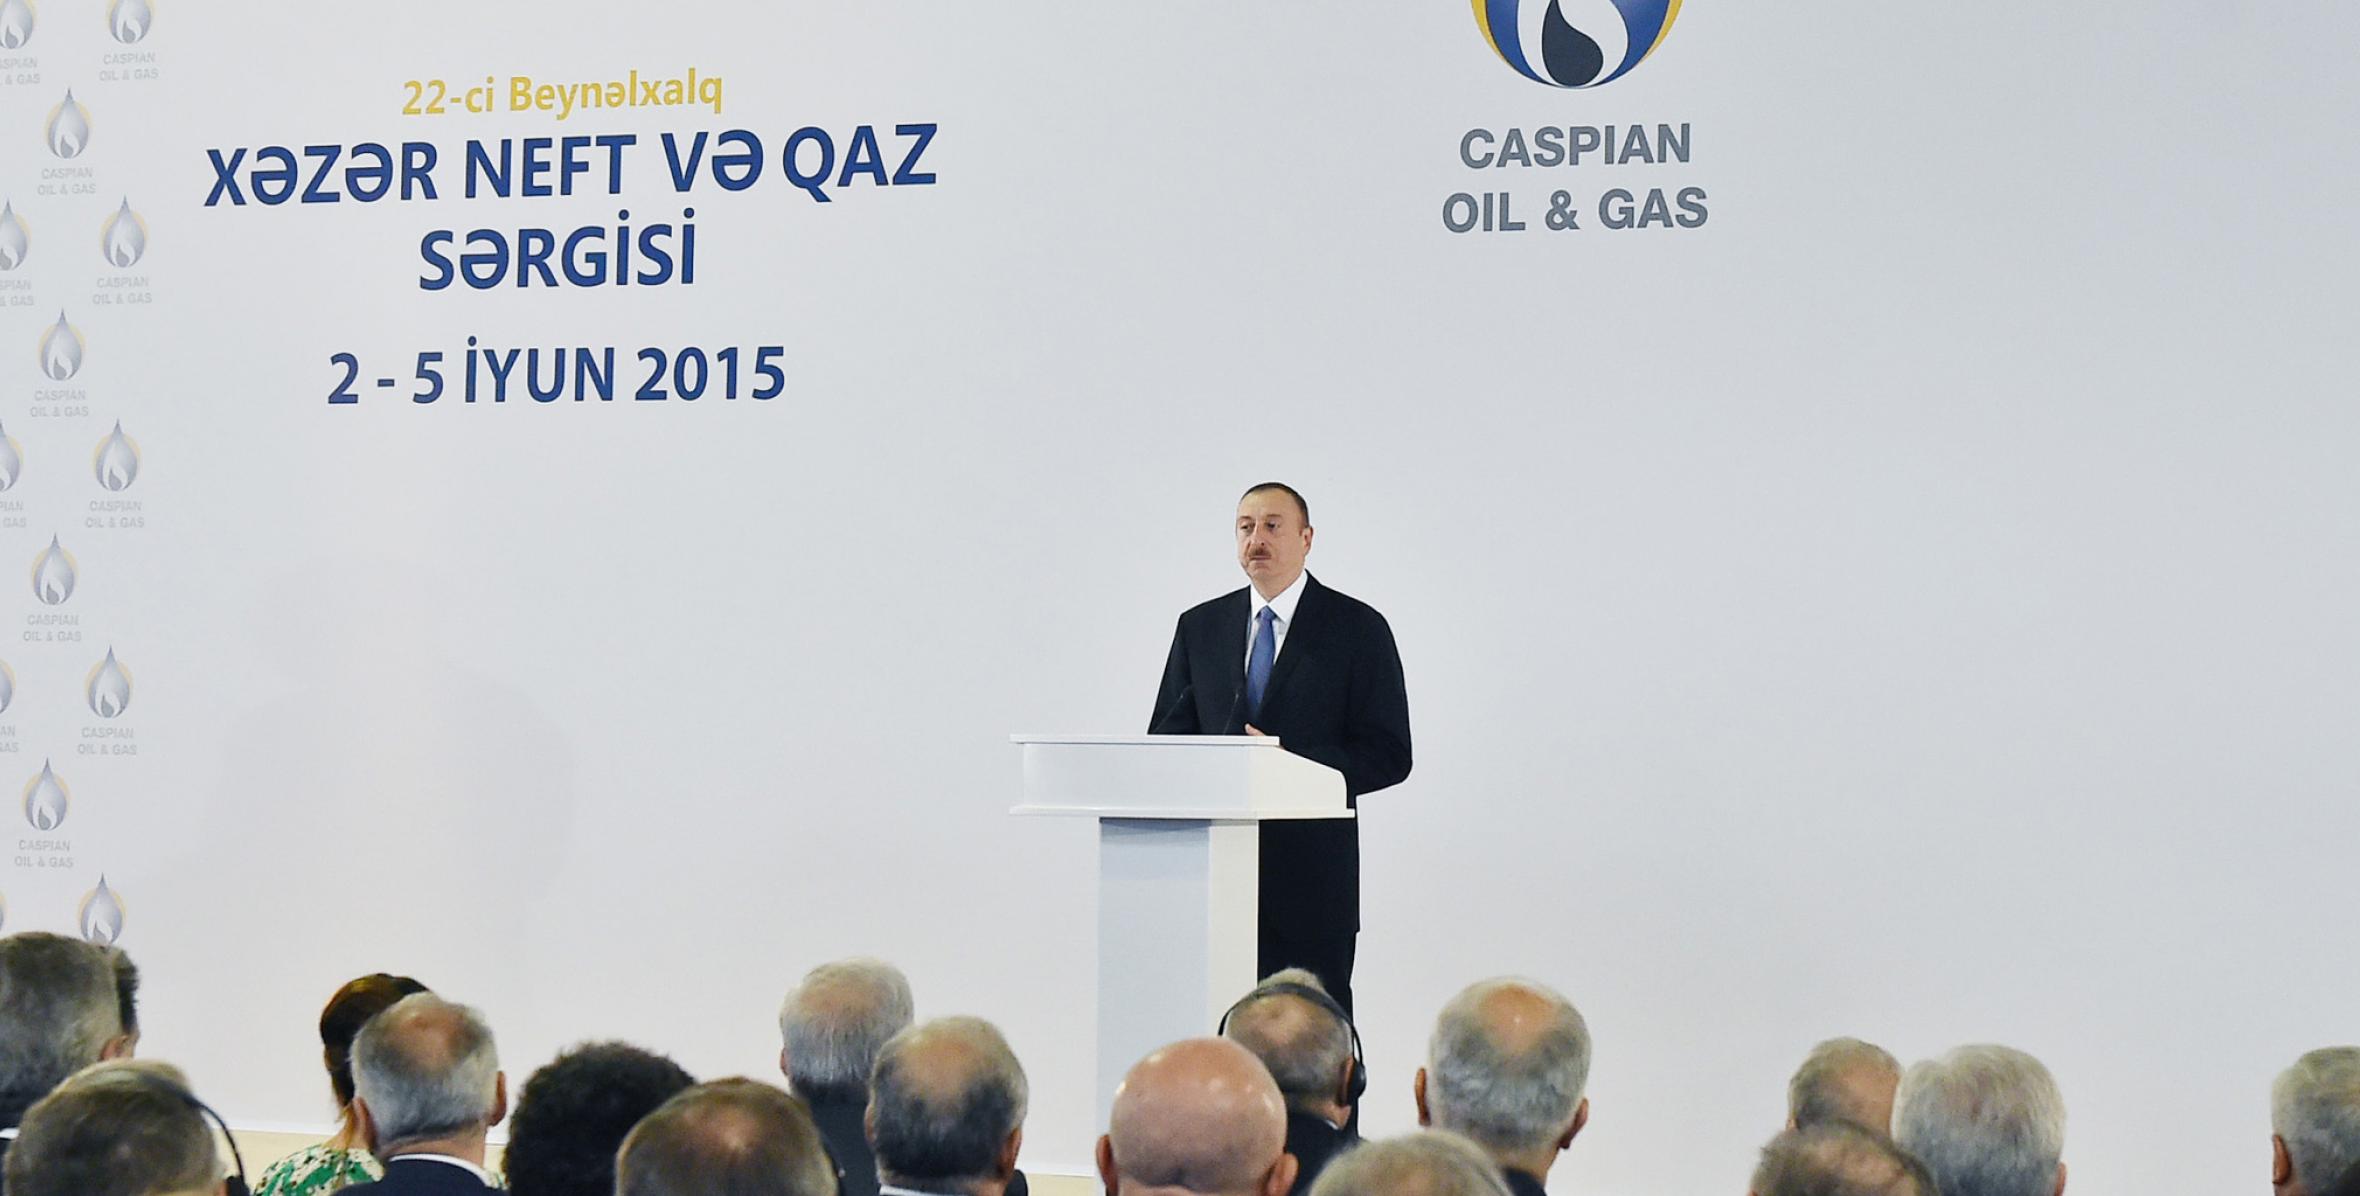 Speech by Ilham Aliyev at the opening of the Caspian Oil & Gas 2015 exhibition